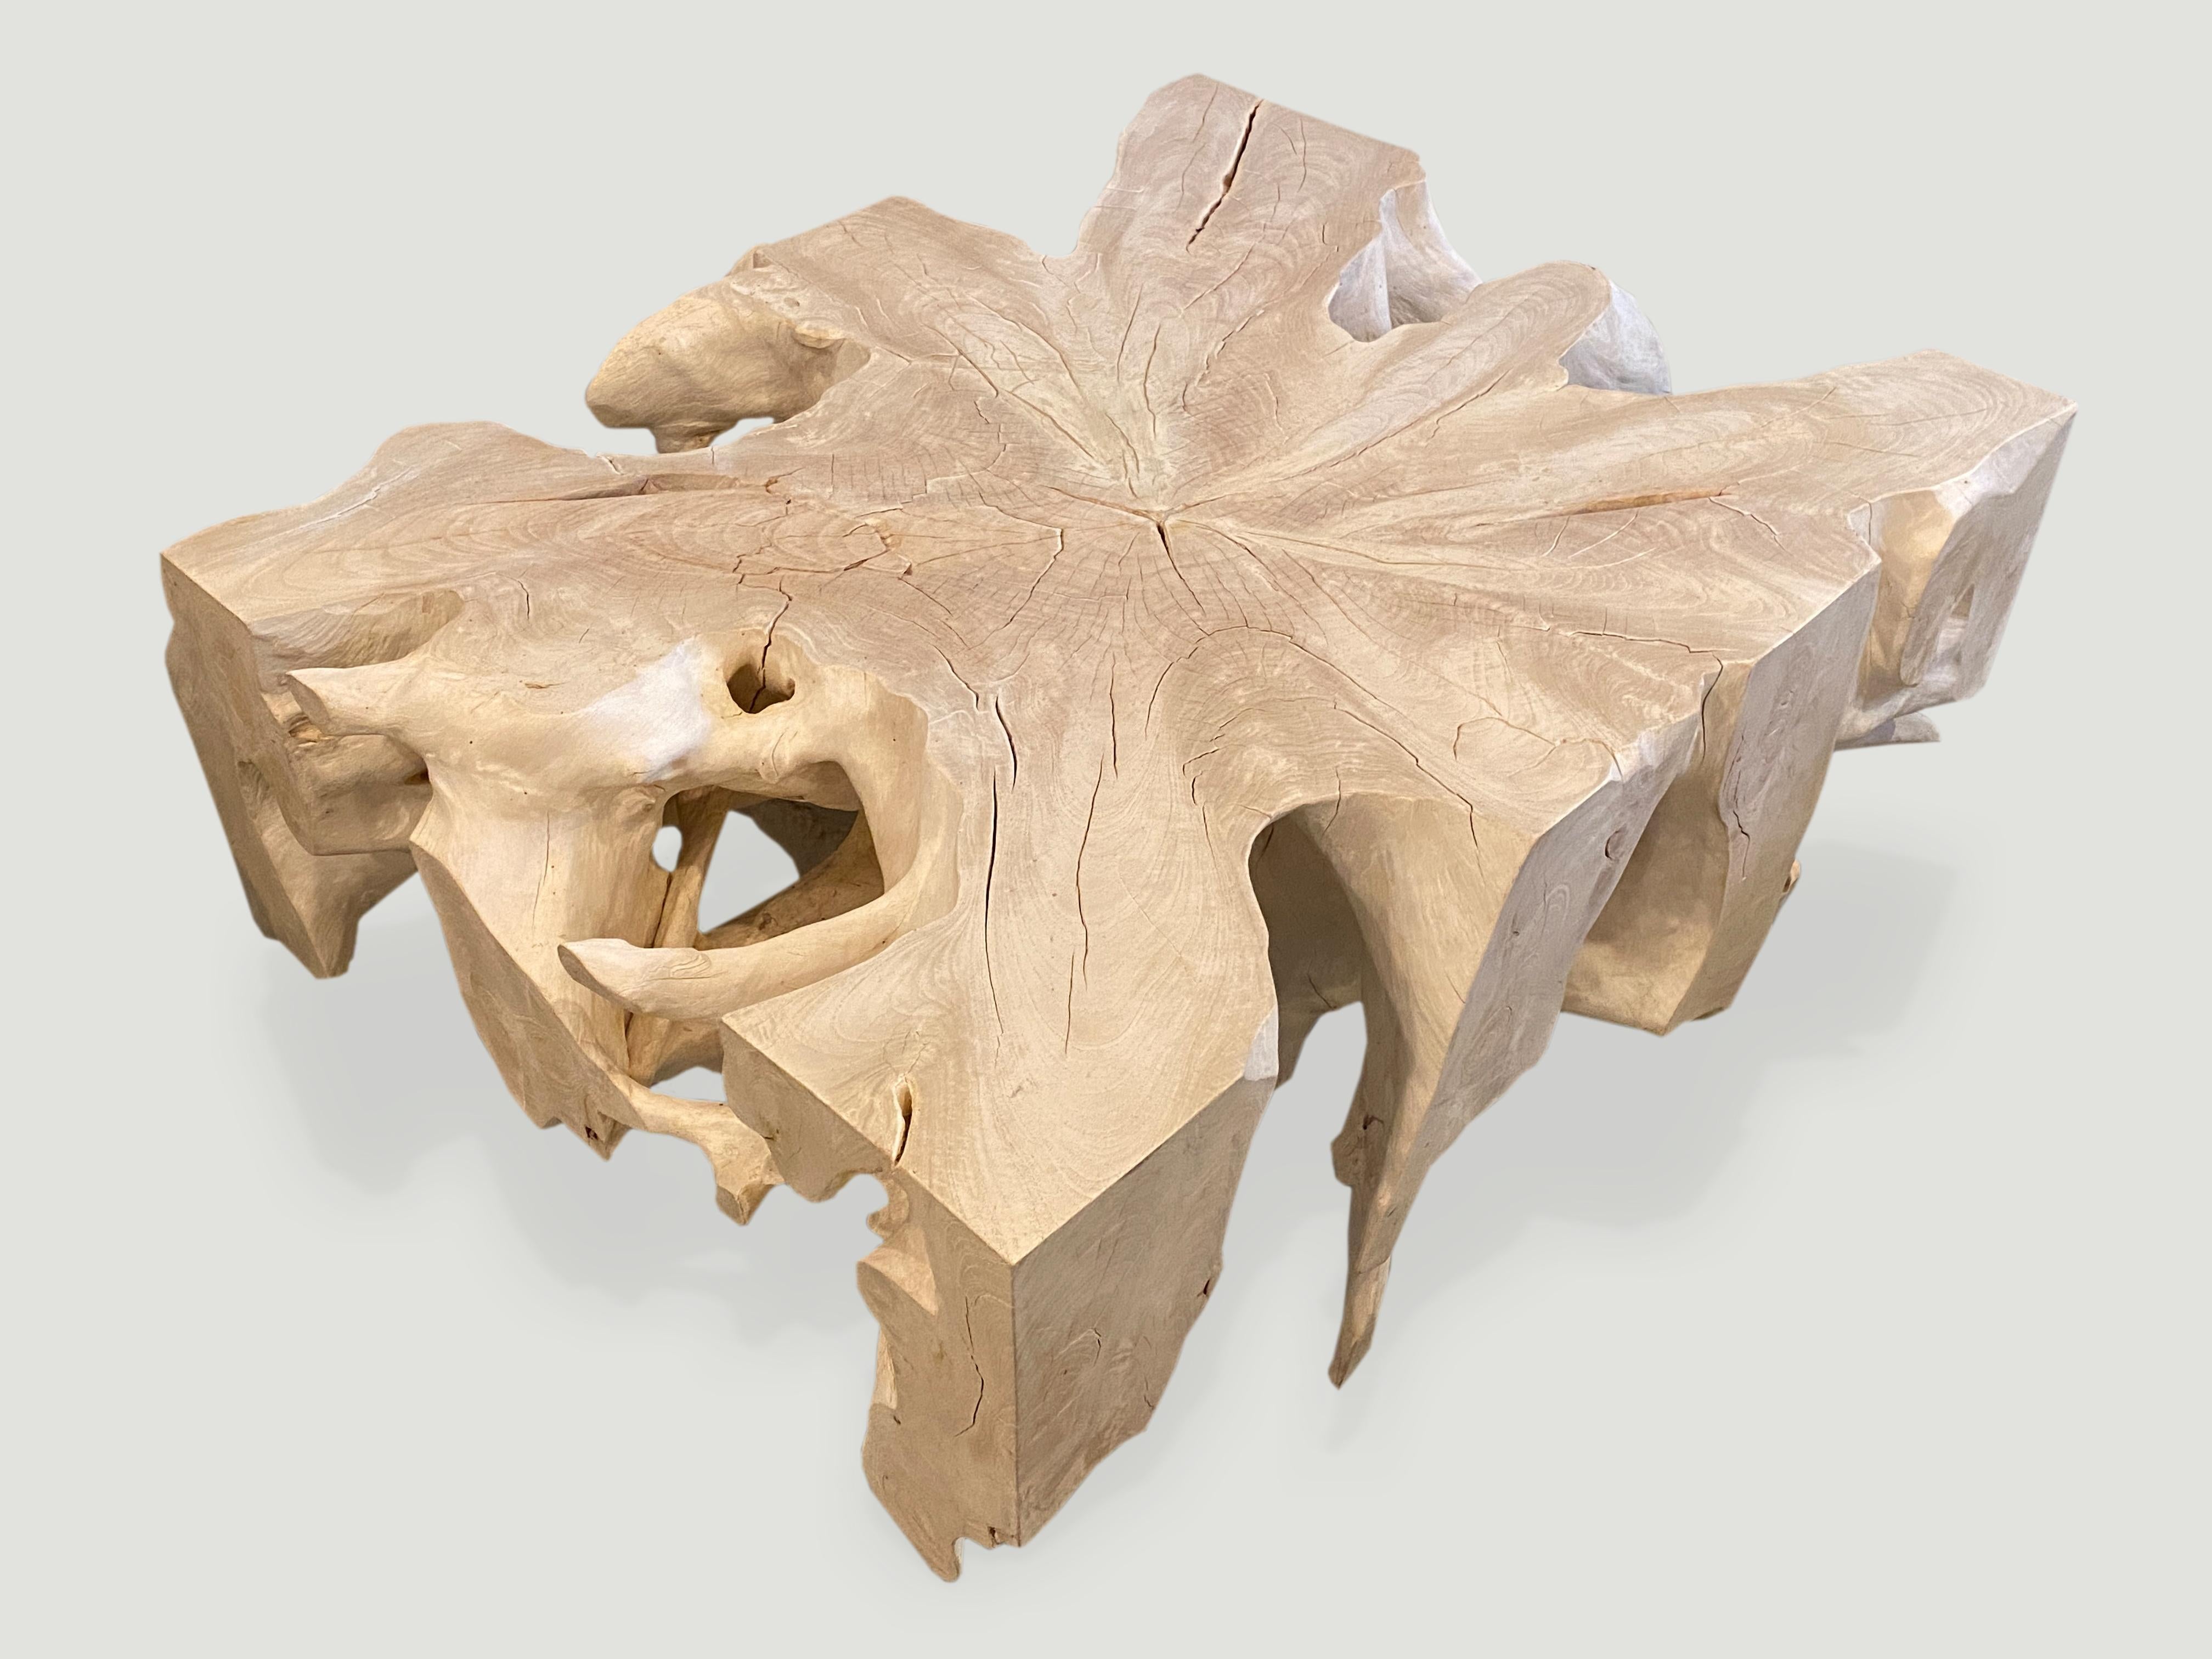 Bleached teak wood root coffee table or if turned on the side a console. Hand carved from a single reclaimed teak root.

The St. Barts collection features an exciting new line of organic white wash, bleached and natural weathered teak furniture.